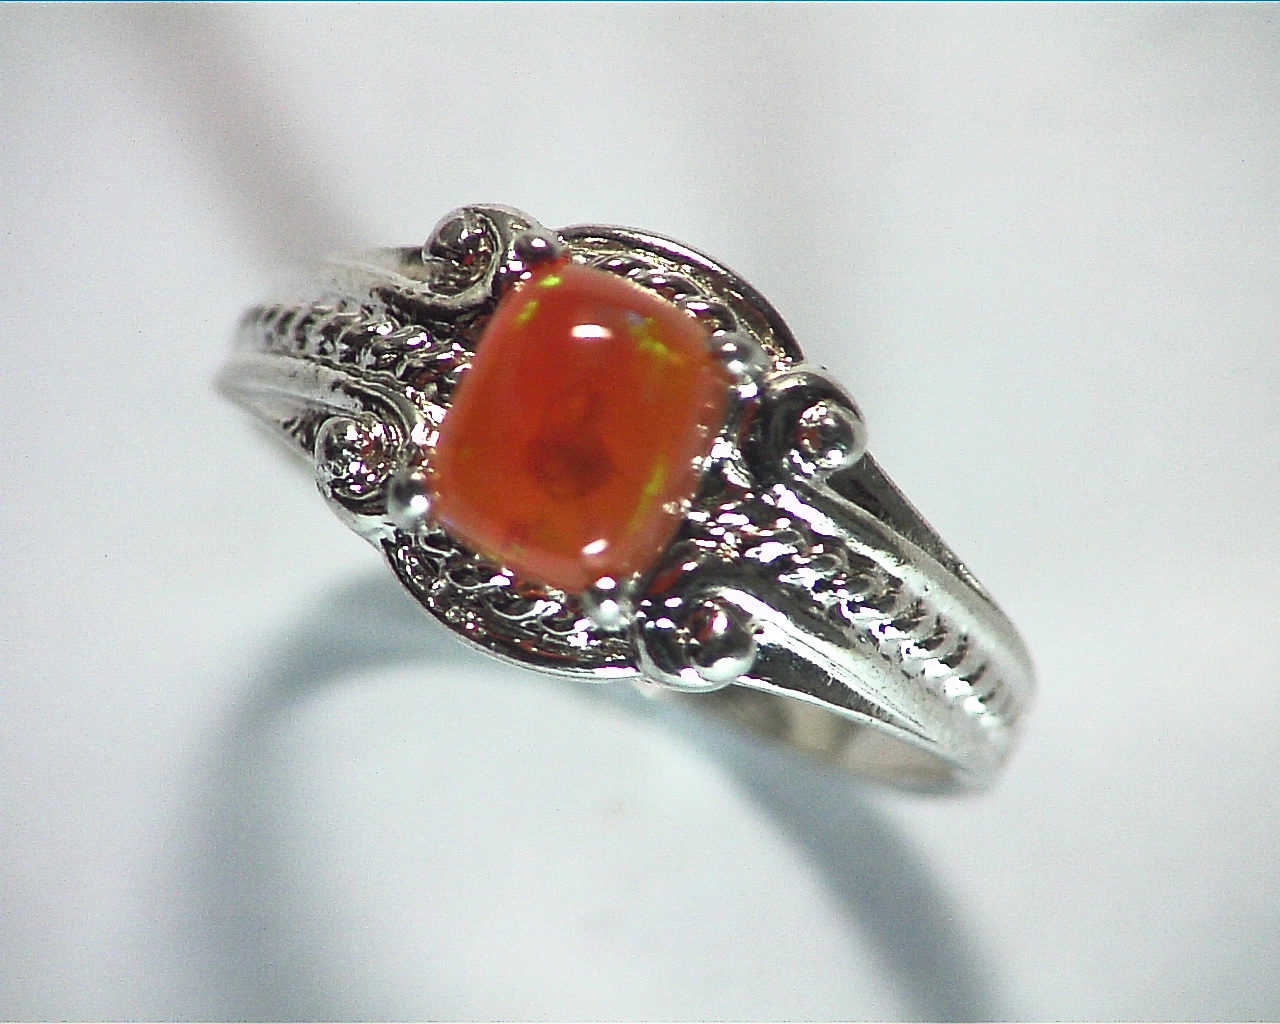 Opal (Mexican) Genuine Gemstone in Sterling Silver Ring RSS,602 7